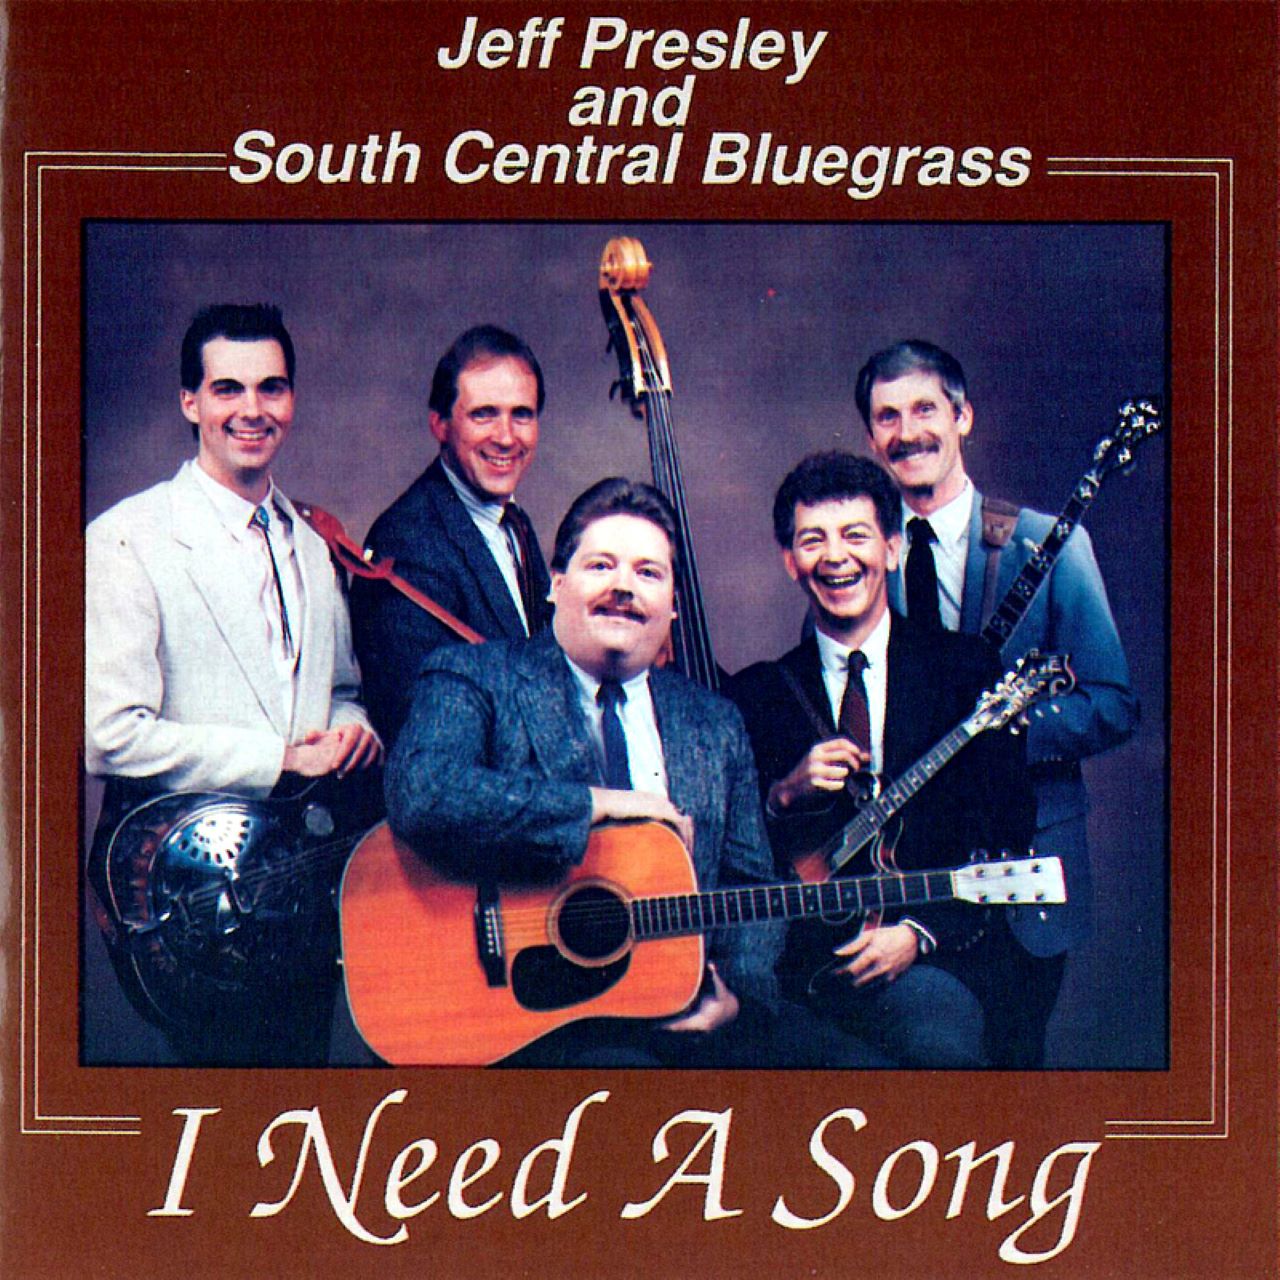 Jeff Presley & South Central Bluegrass - I Need A Song cover album